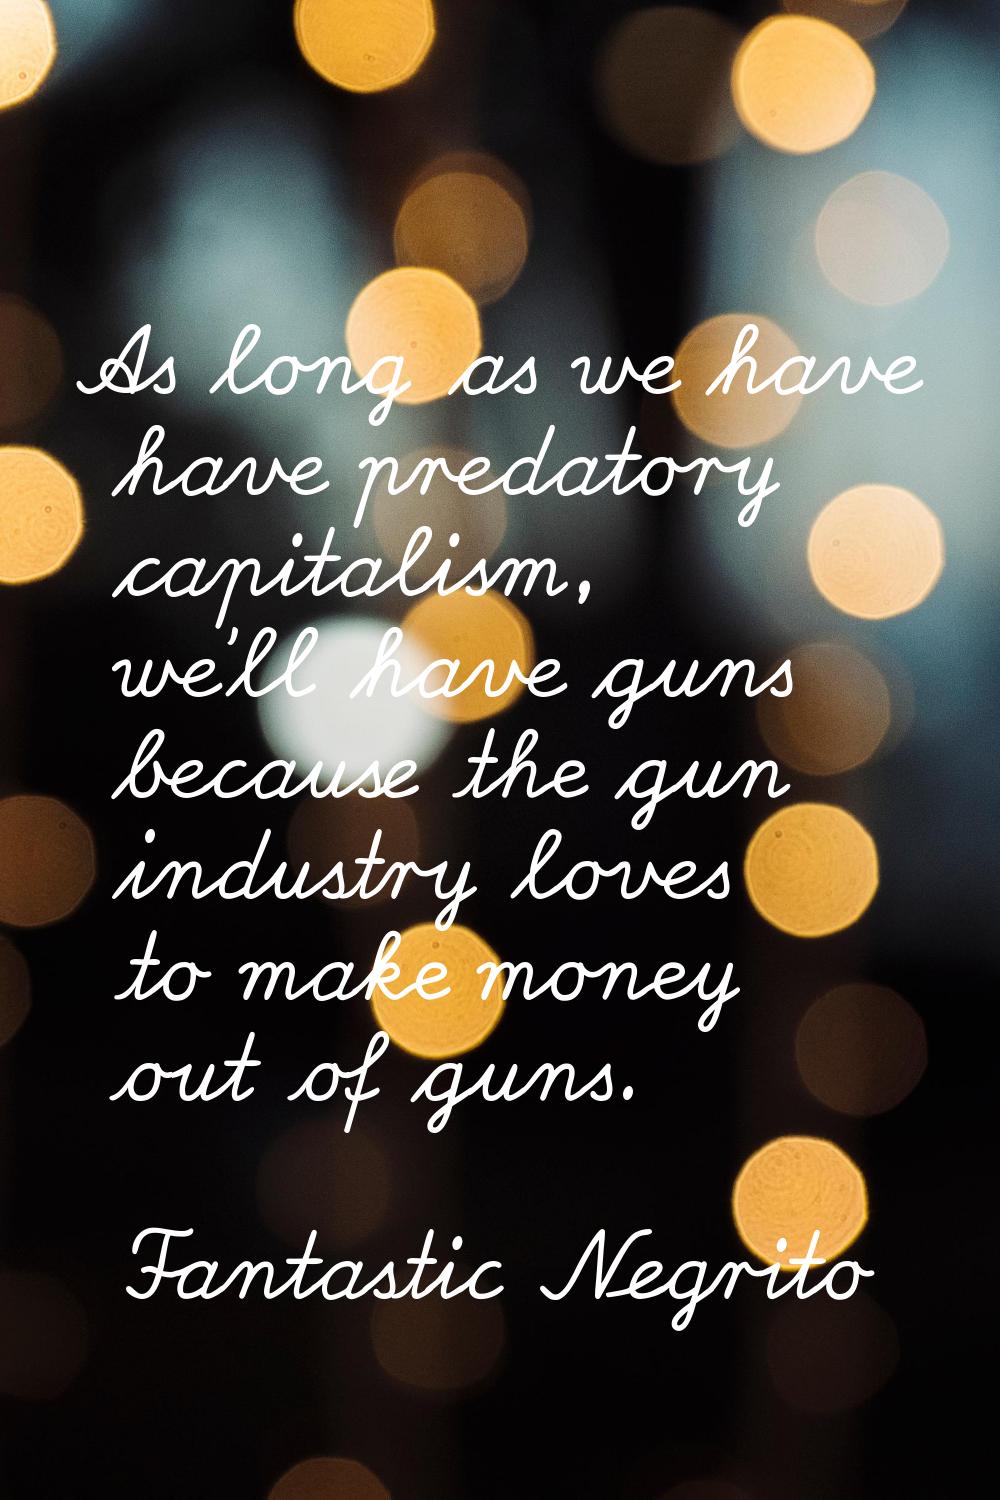 As long as we have have predatory capitalism, we'll have guns because the gun industry loves to mak